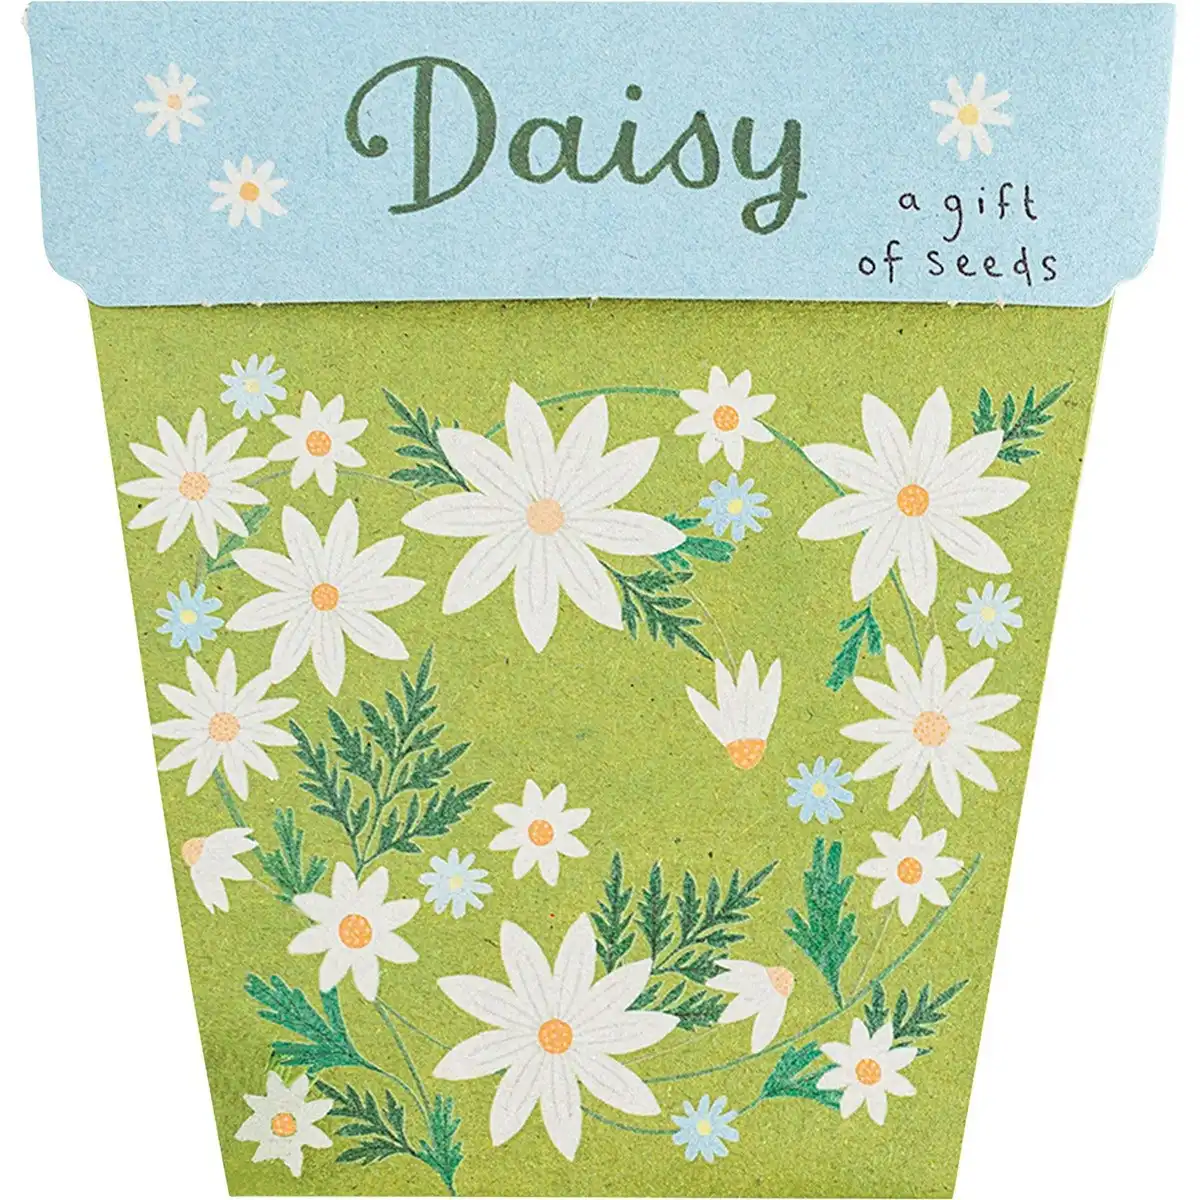 SOW 'N SOW Gift of Seeds Daisy 1